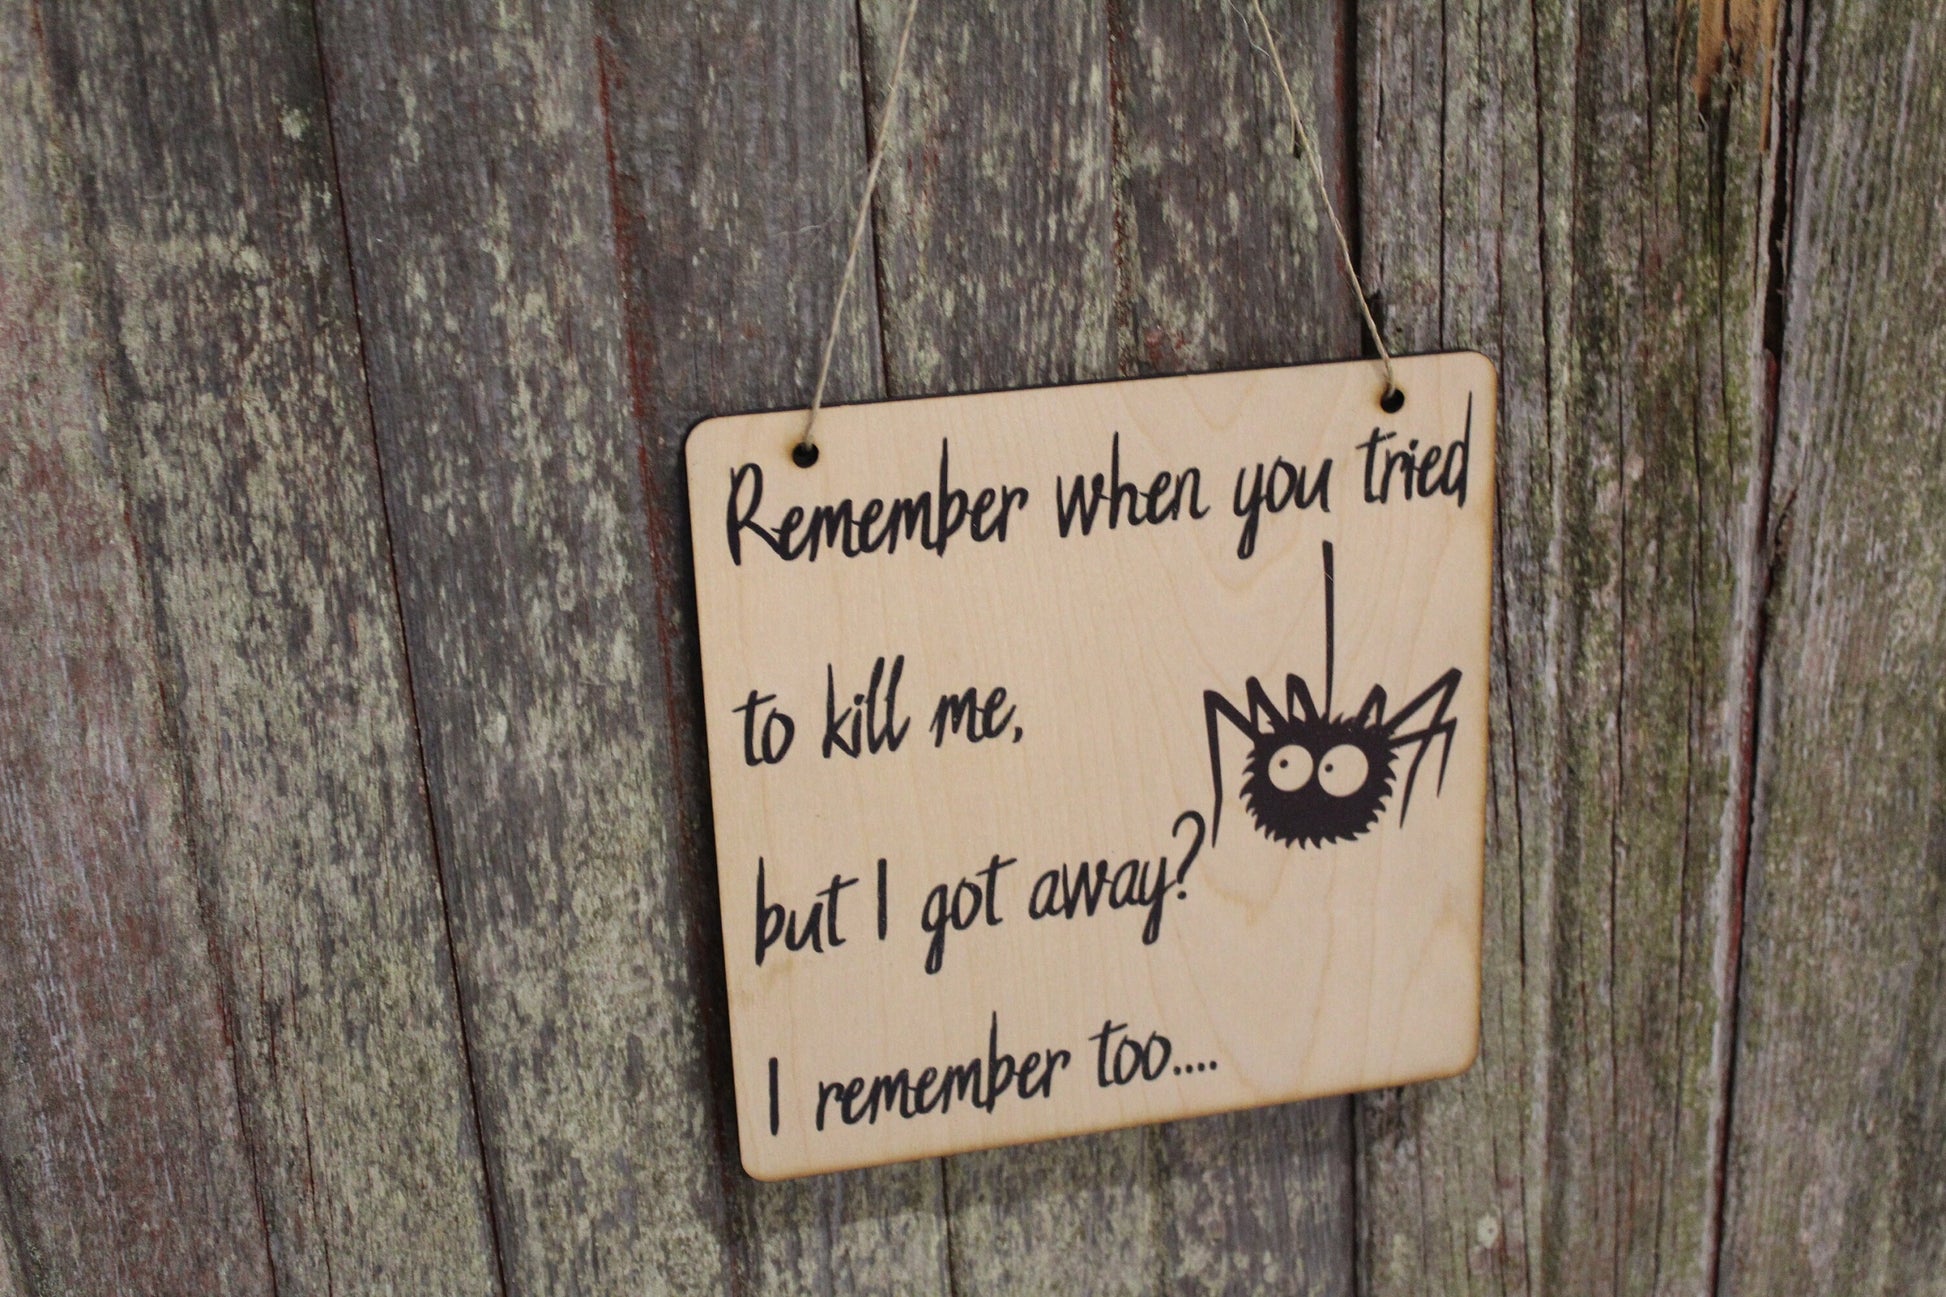 Spider Funny Sign Wood Decor Halloween Fall Remember When You Tried To Kill Me Decoration Joke Wall Décor Wood Print